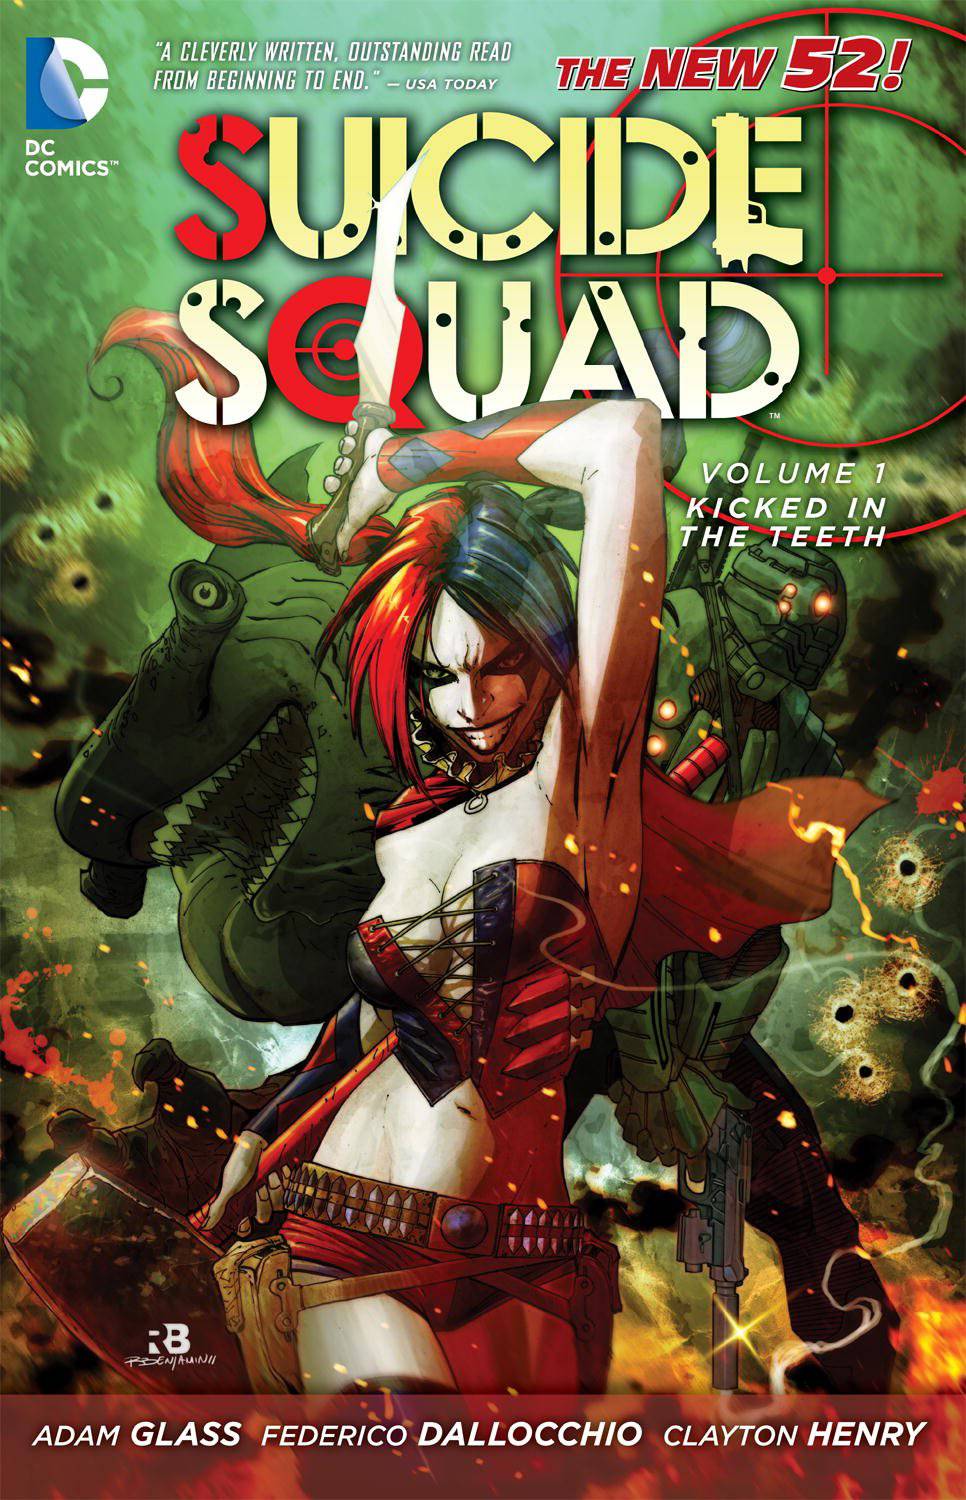 Suicide Squad Graphic Novel Volume 1 Kicked In The Teeth